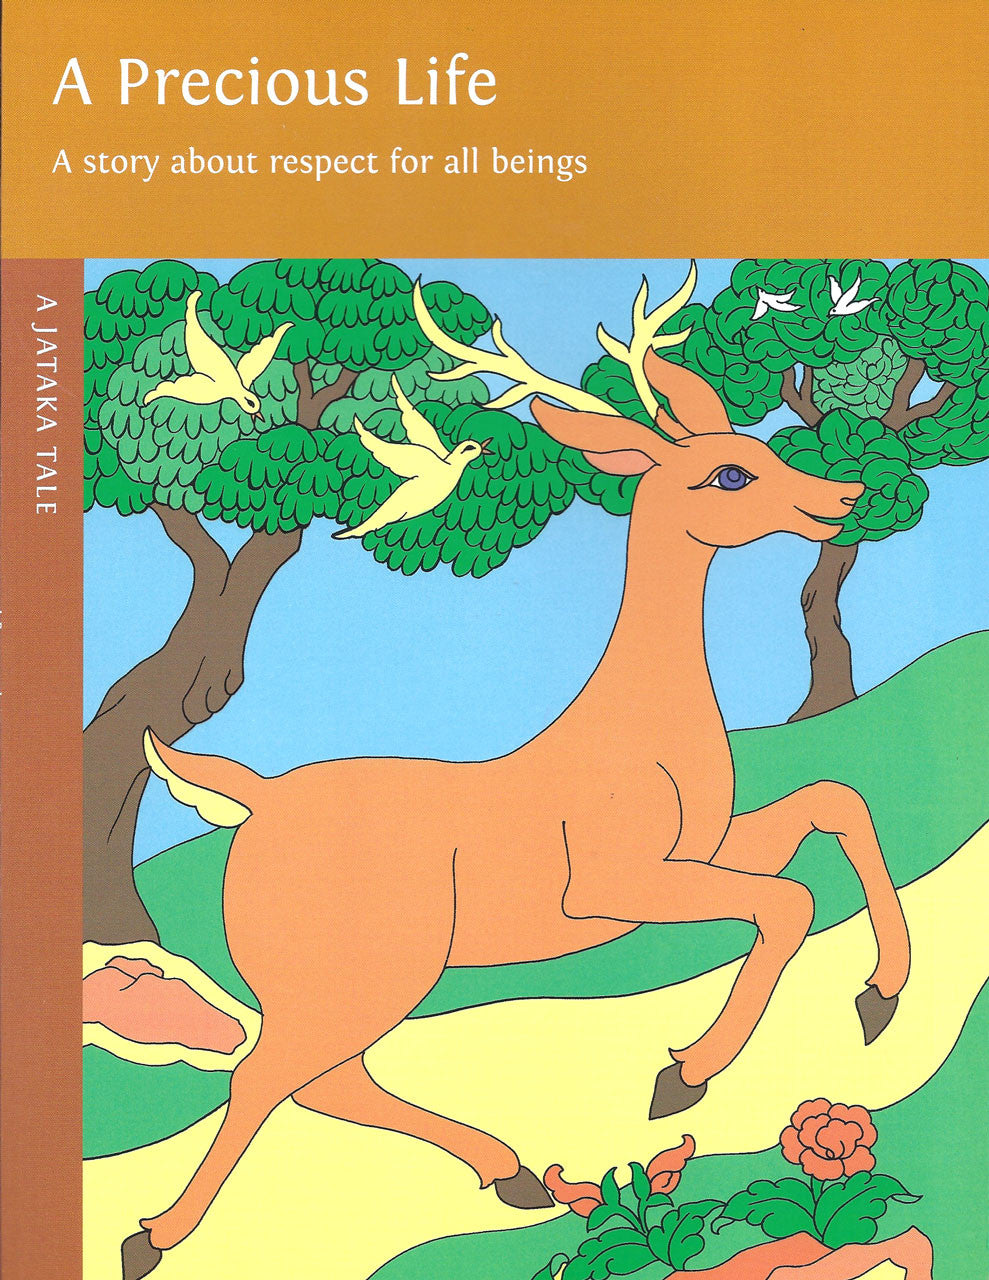 A Precious Life: A story about respect for all beings. A Jataka Tale, illustrated by Rosalyn White